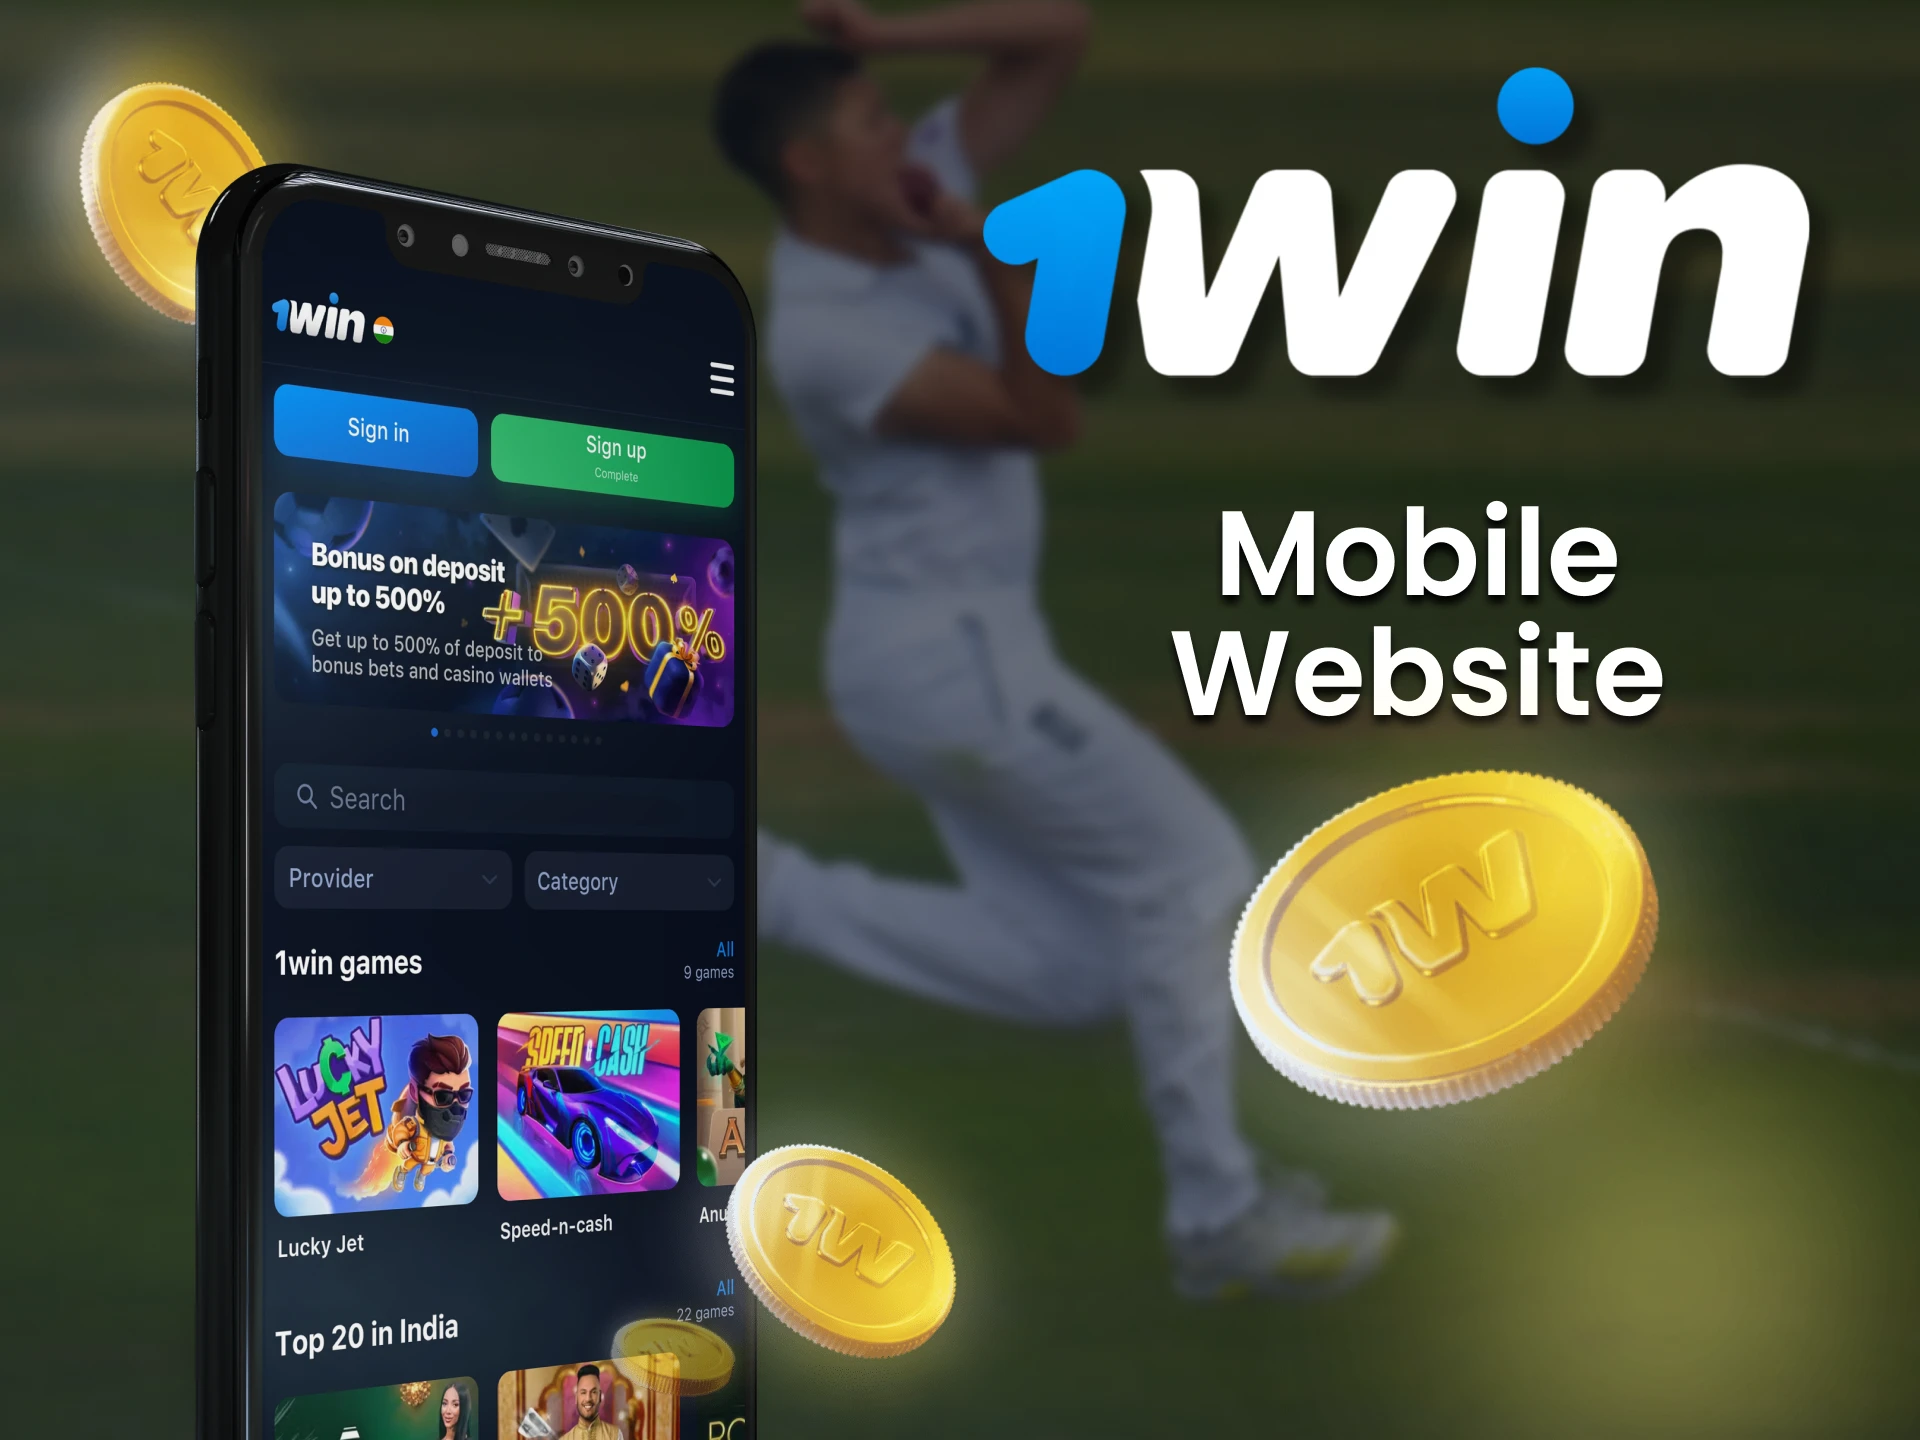 Use the mobile version of the 1win site for betting.